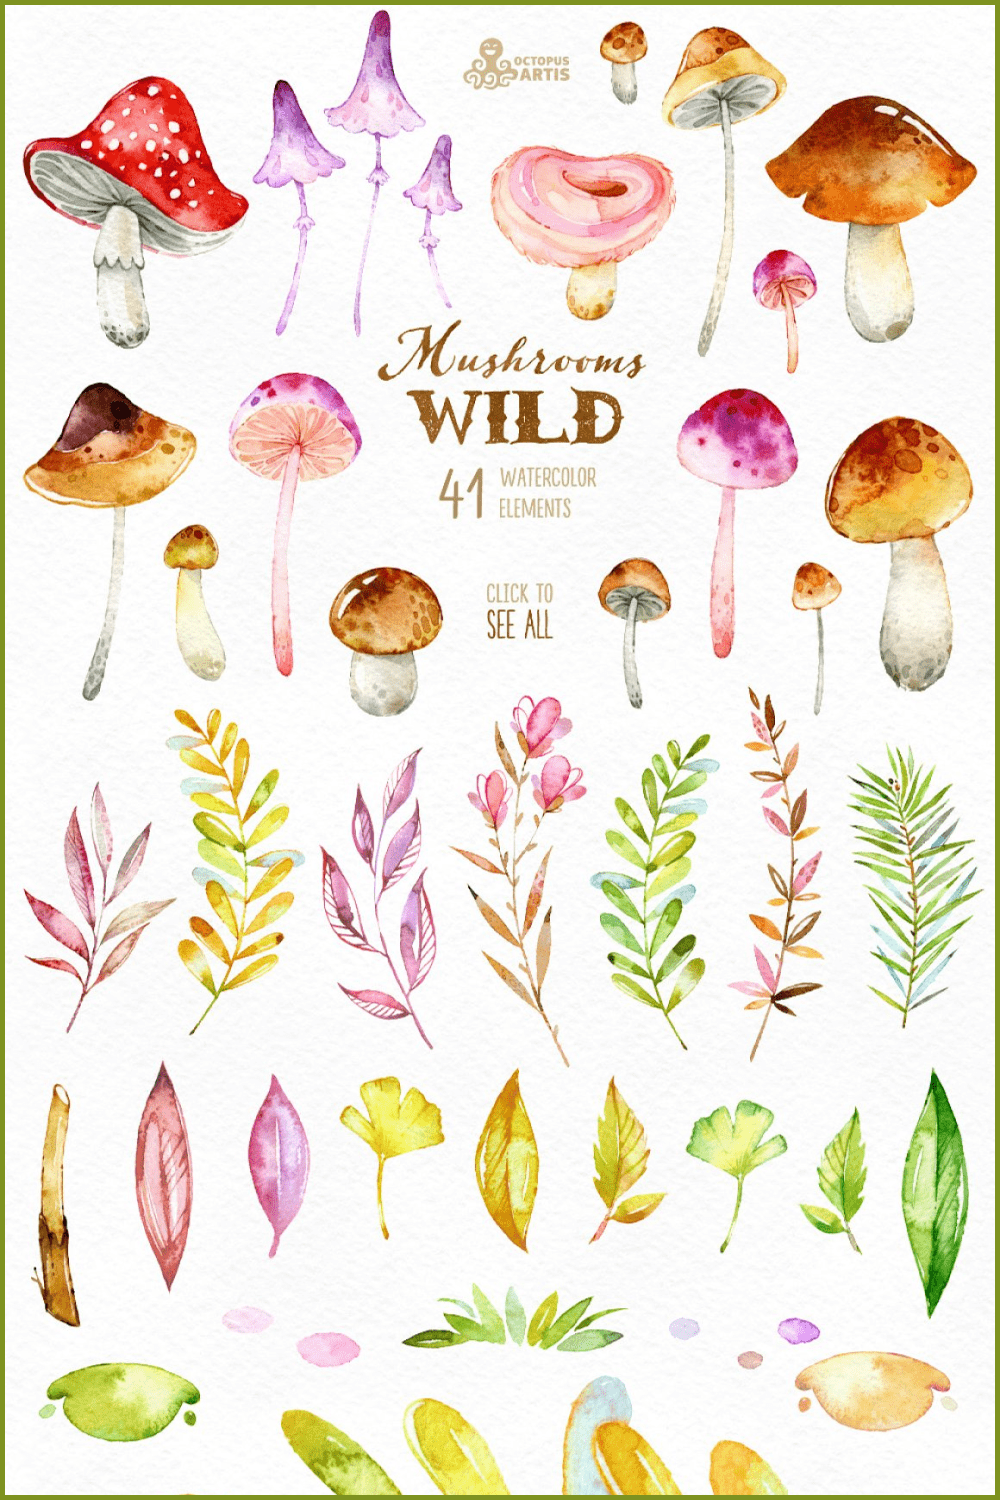 Wild mushrooms. forest collection - pinterest image preview.